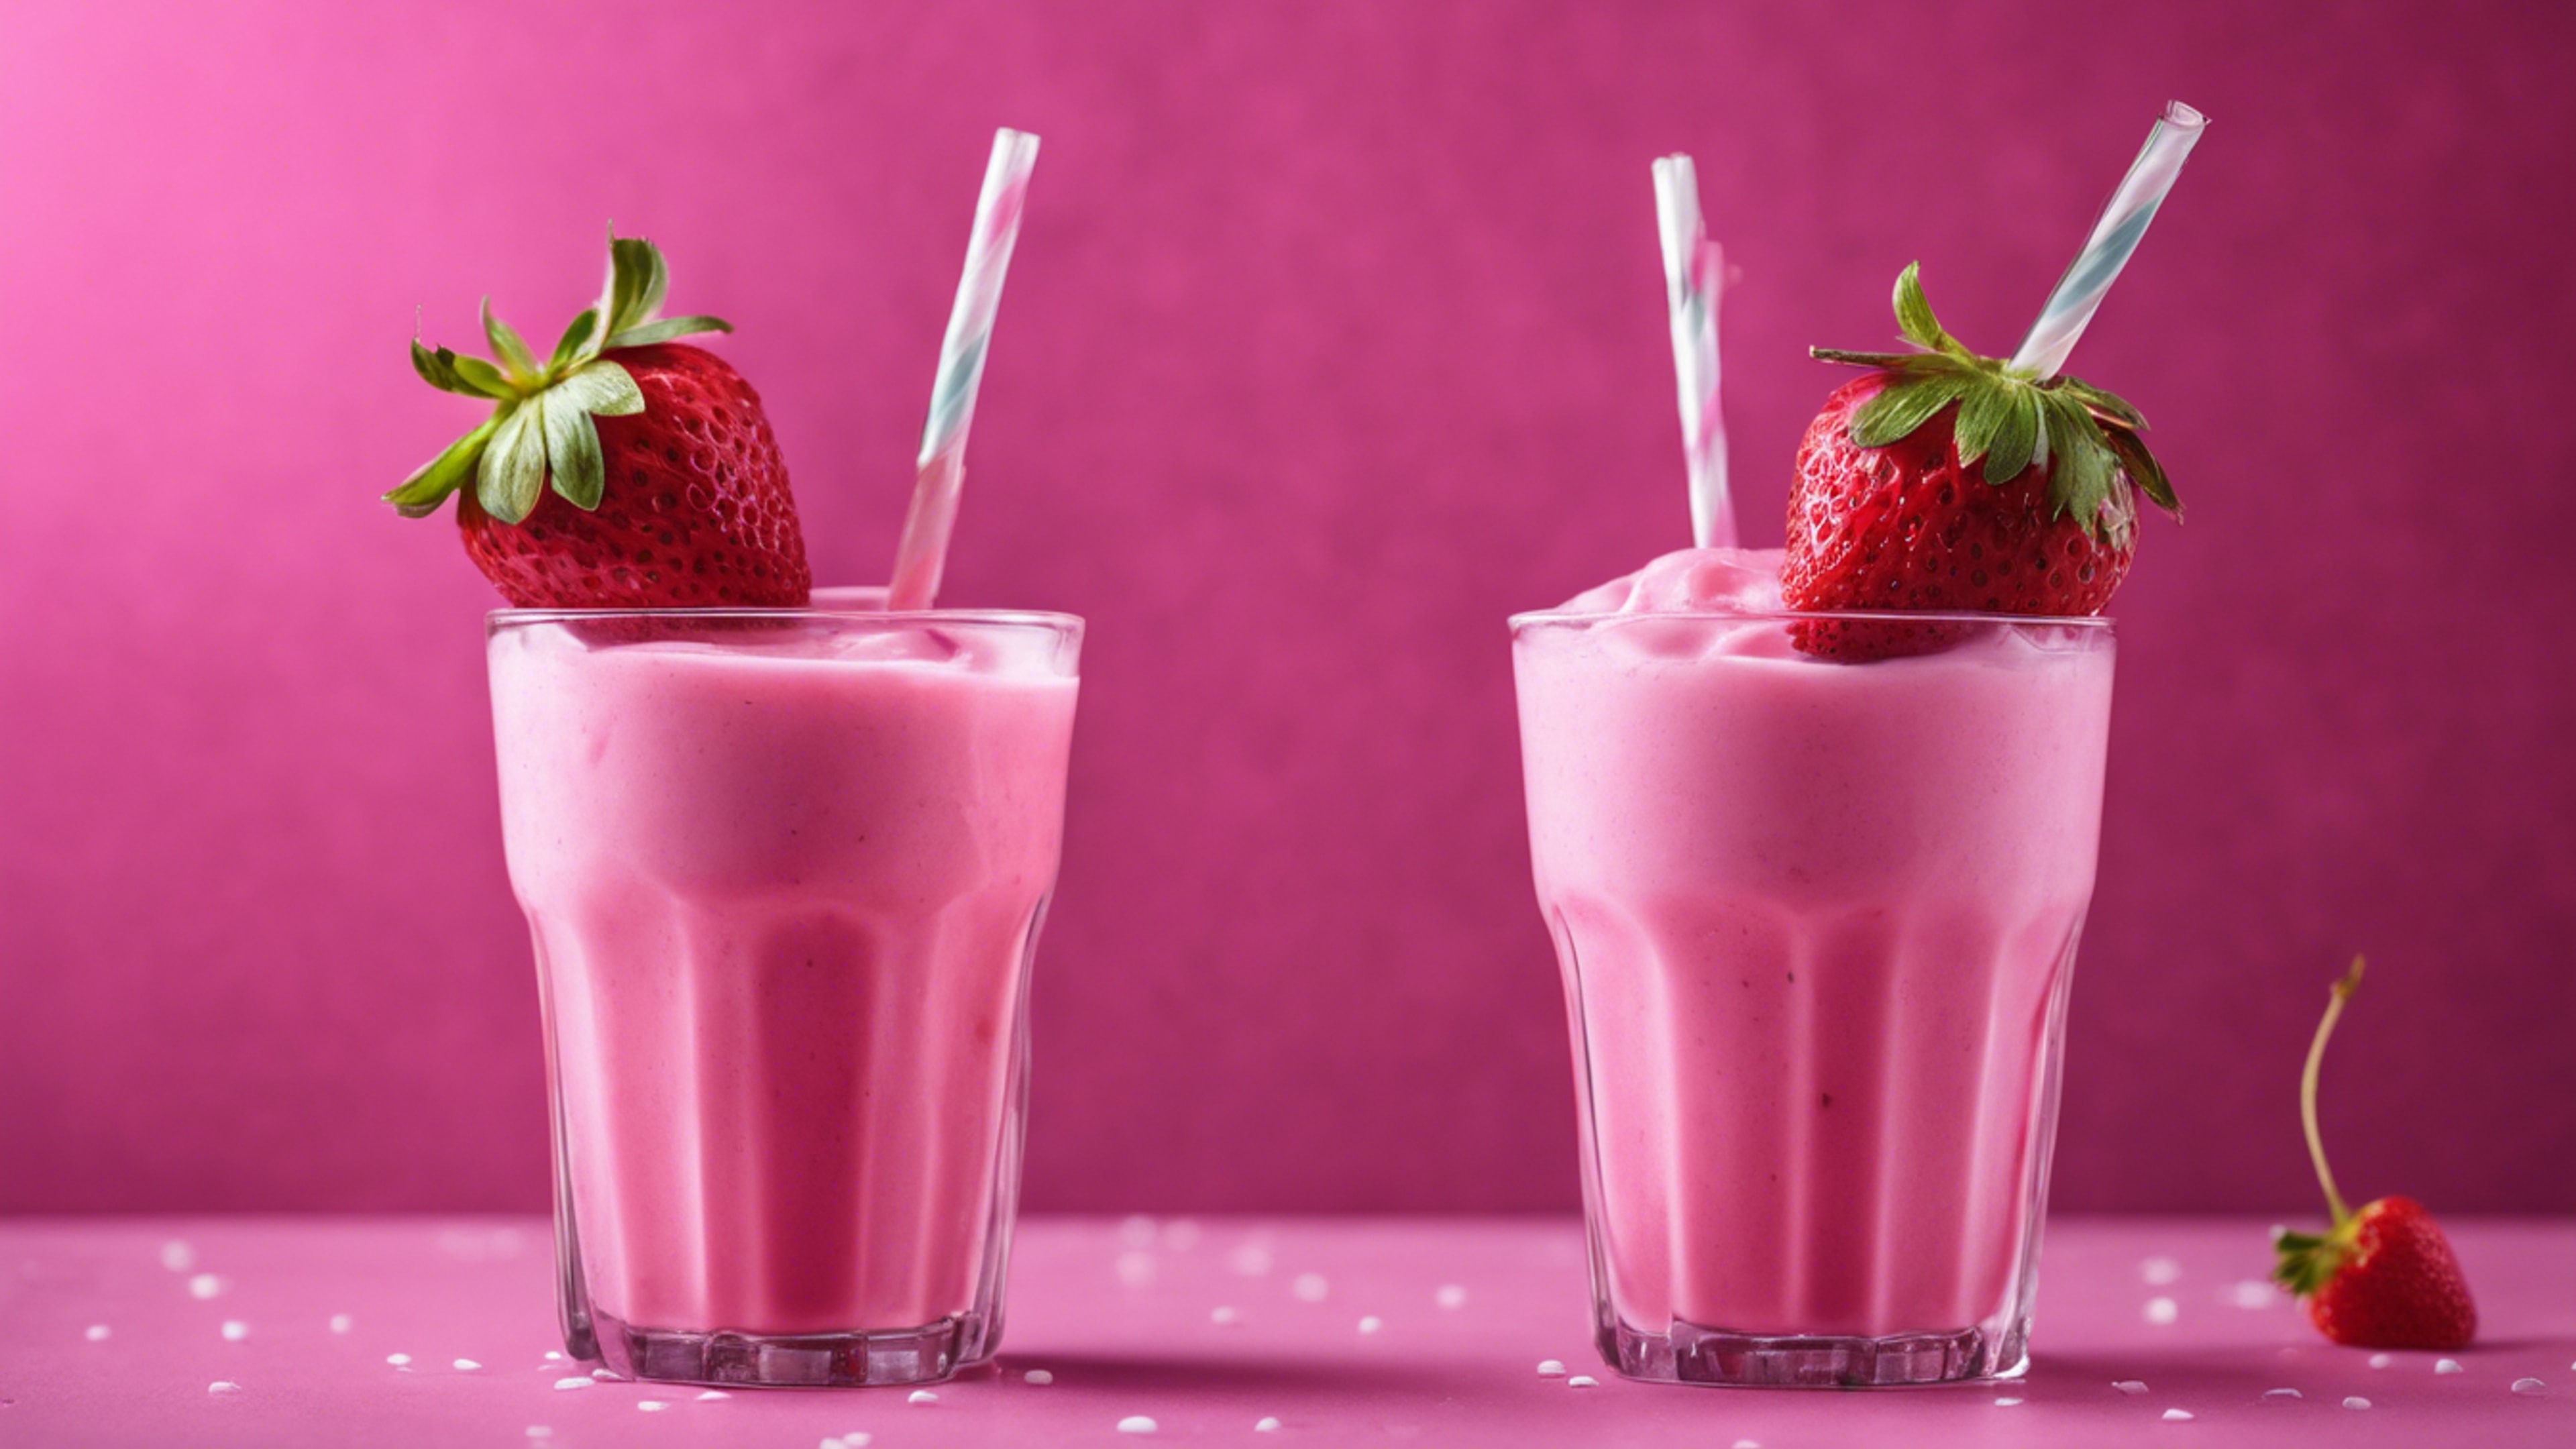 Two glasses filled with bright pink strawberry milkshake garnished with straws and cherries. 墙纸[367e513037cf4f879d8a]